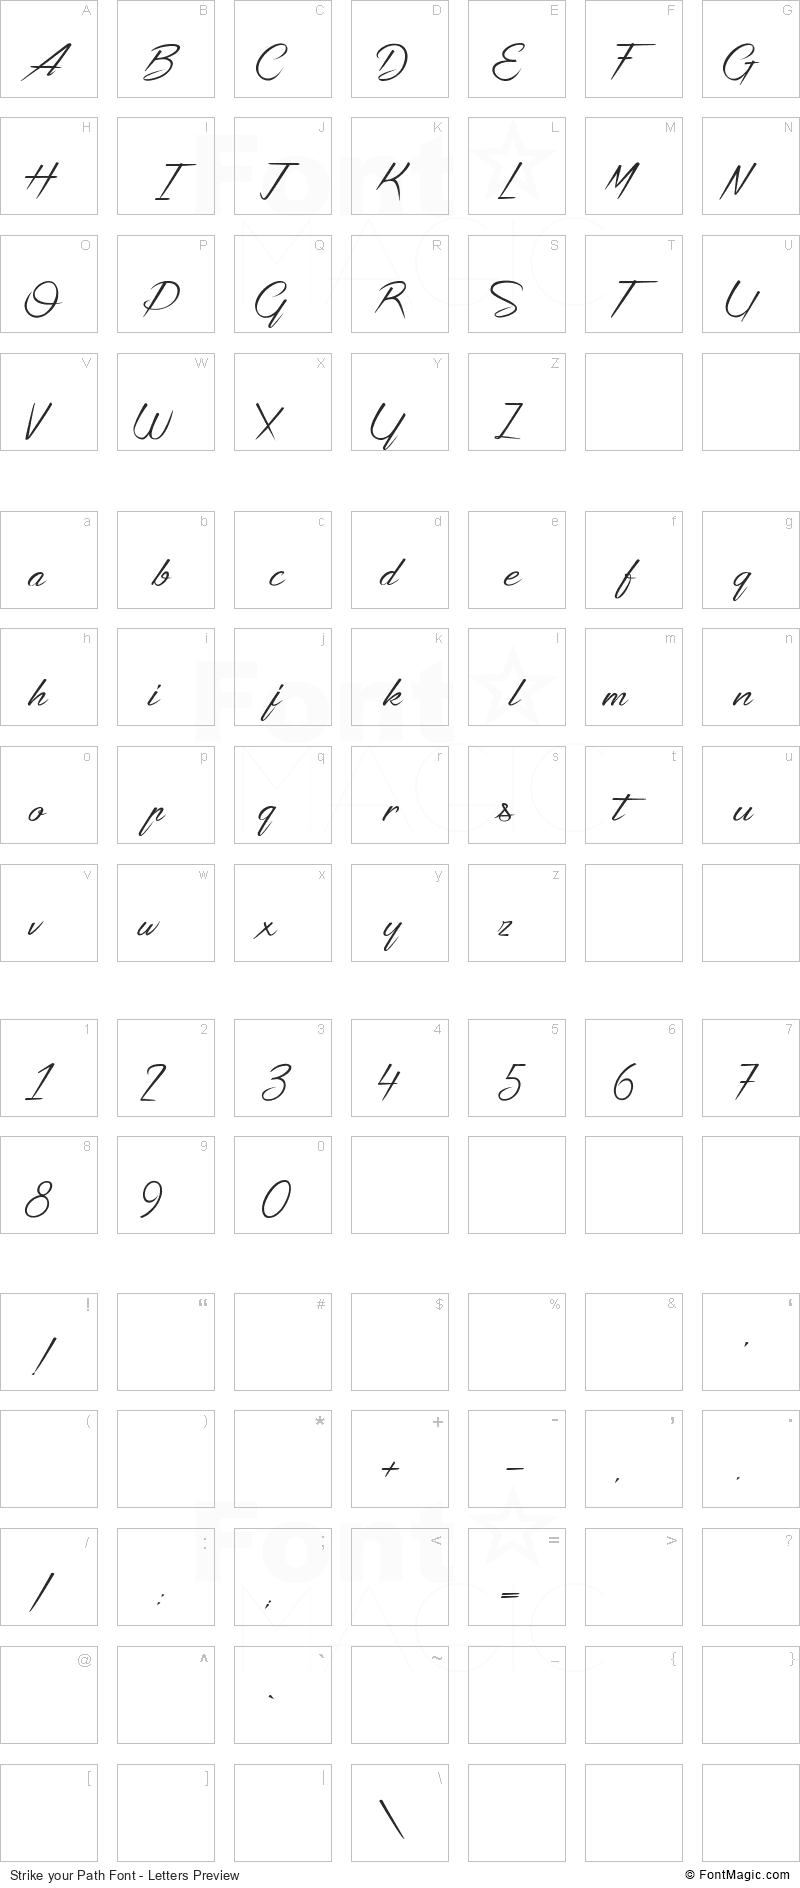 Strike your Path Font - All Latters Preview Chart